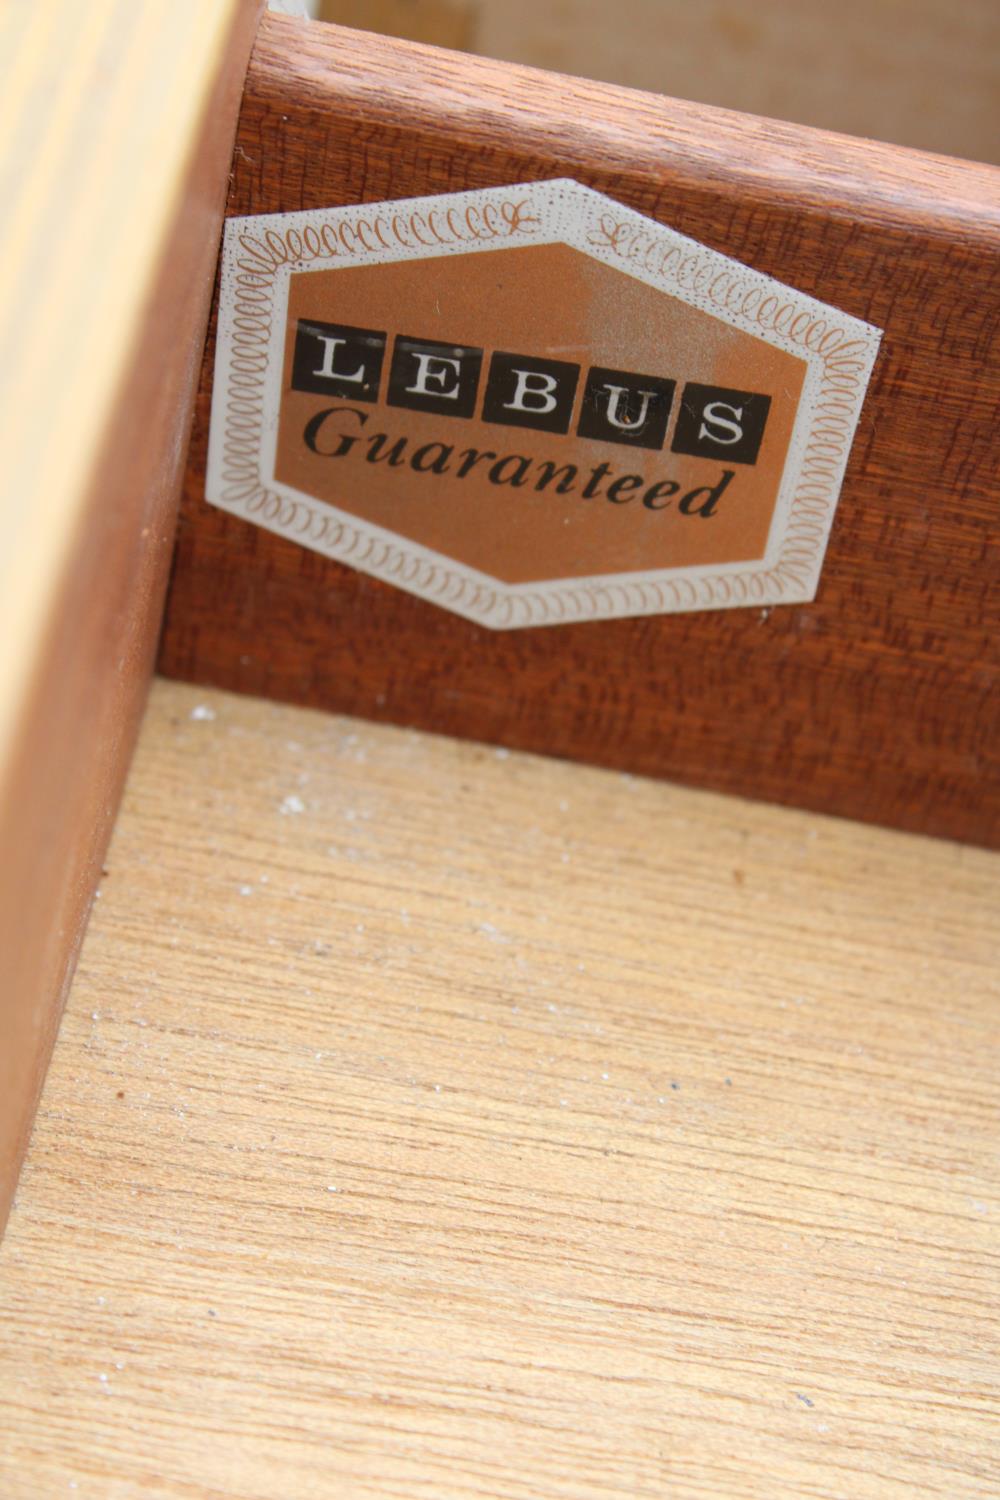 TWO RETRO OAK LEBUS CHESTS OF DRAWERS AND A BEDSIDE LOCKER - Image 3 of 3